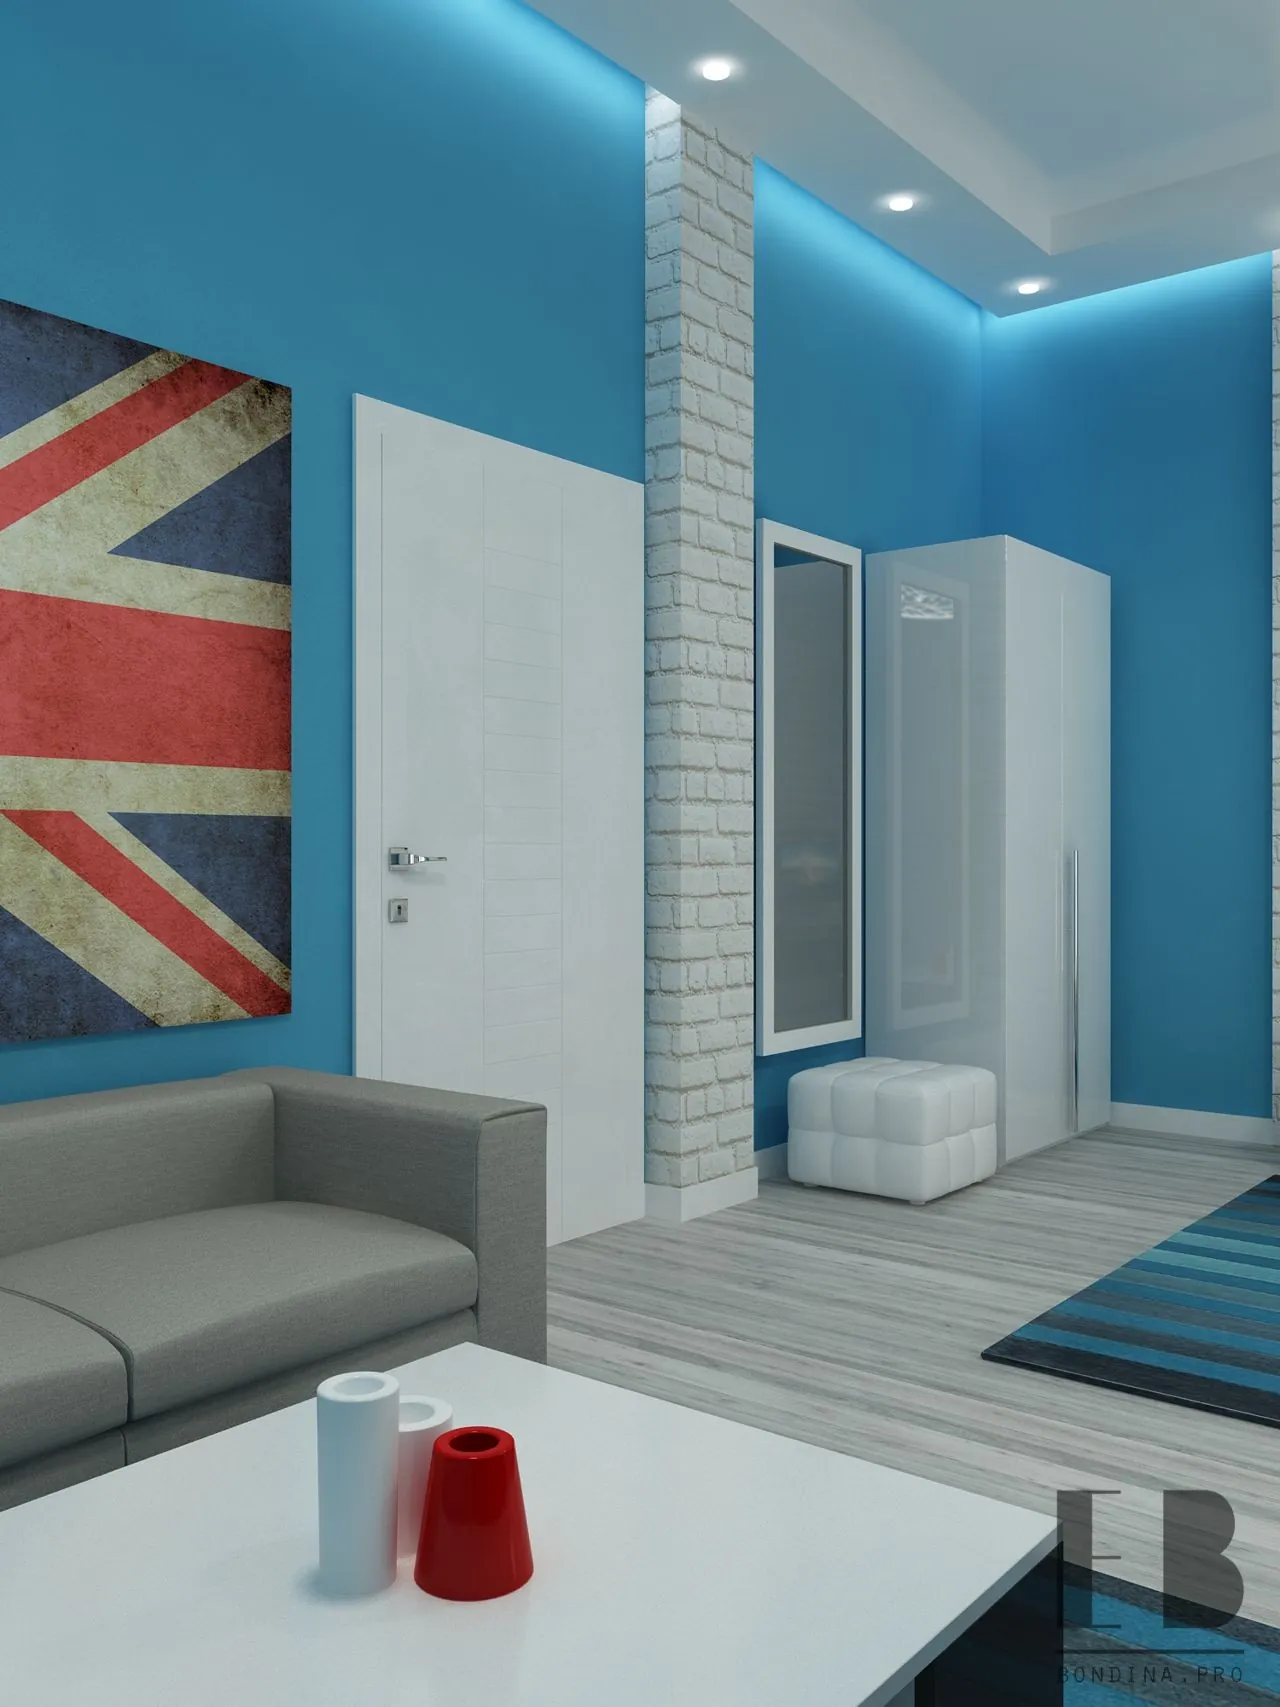 Bedroom Design for Teens in white and blue